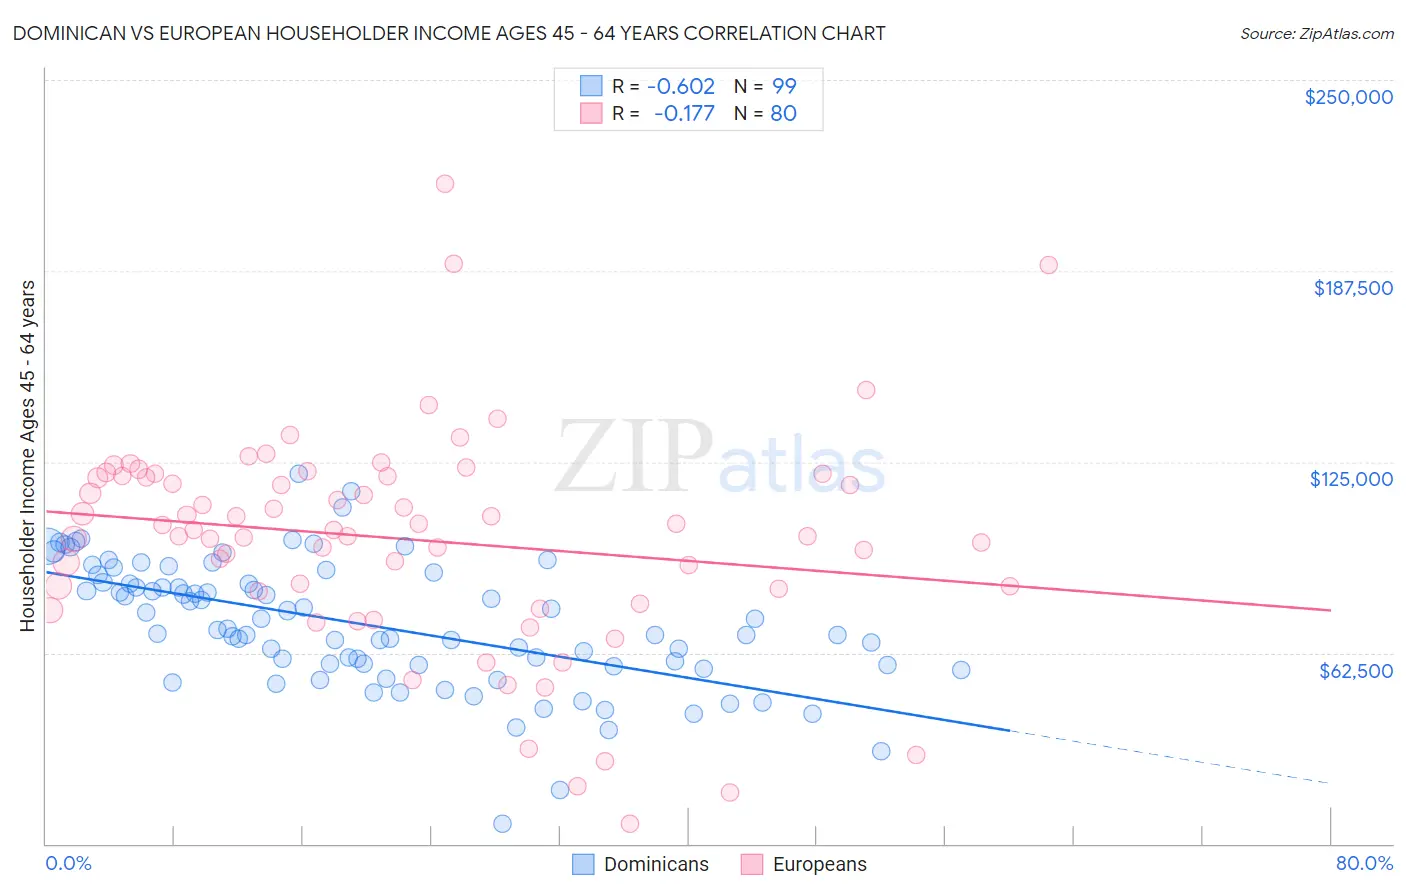 Dominican vs European Householder Income Ages 45 - 64 years